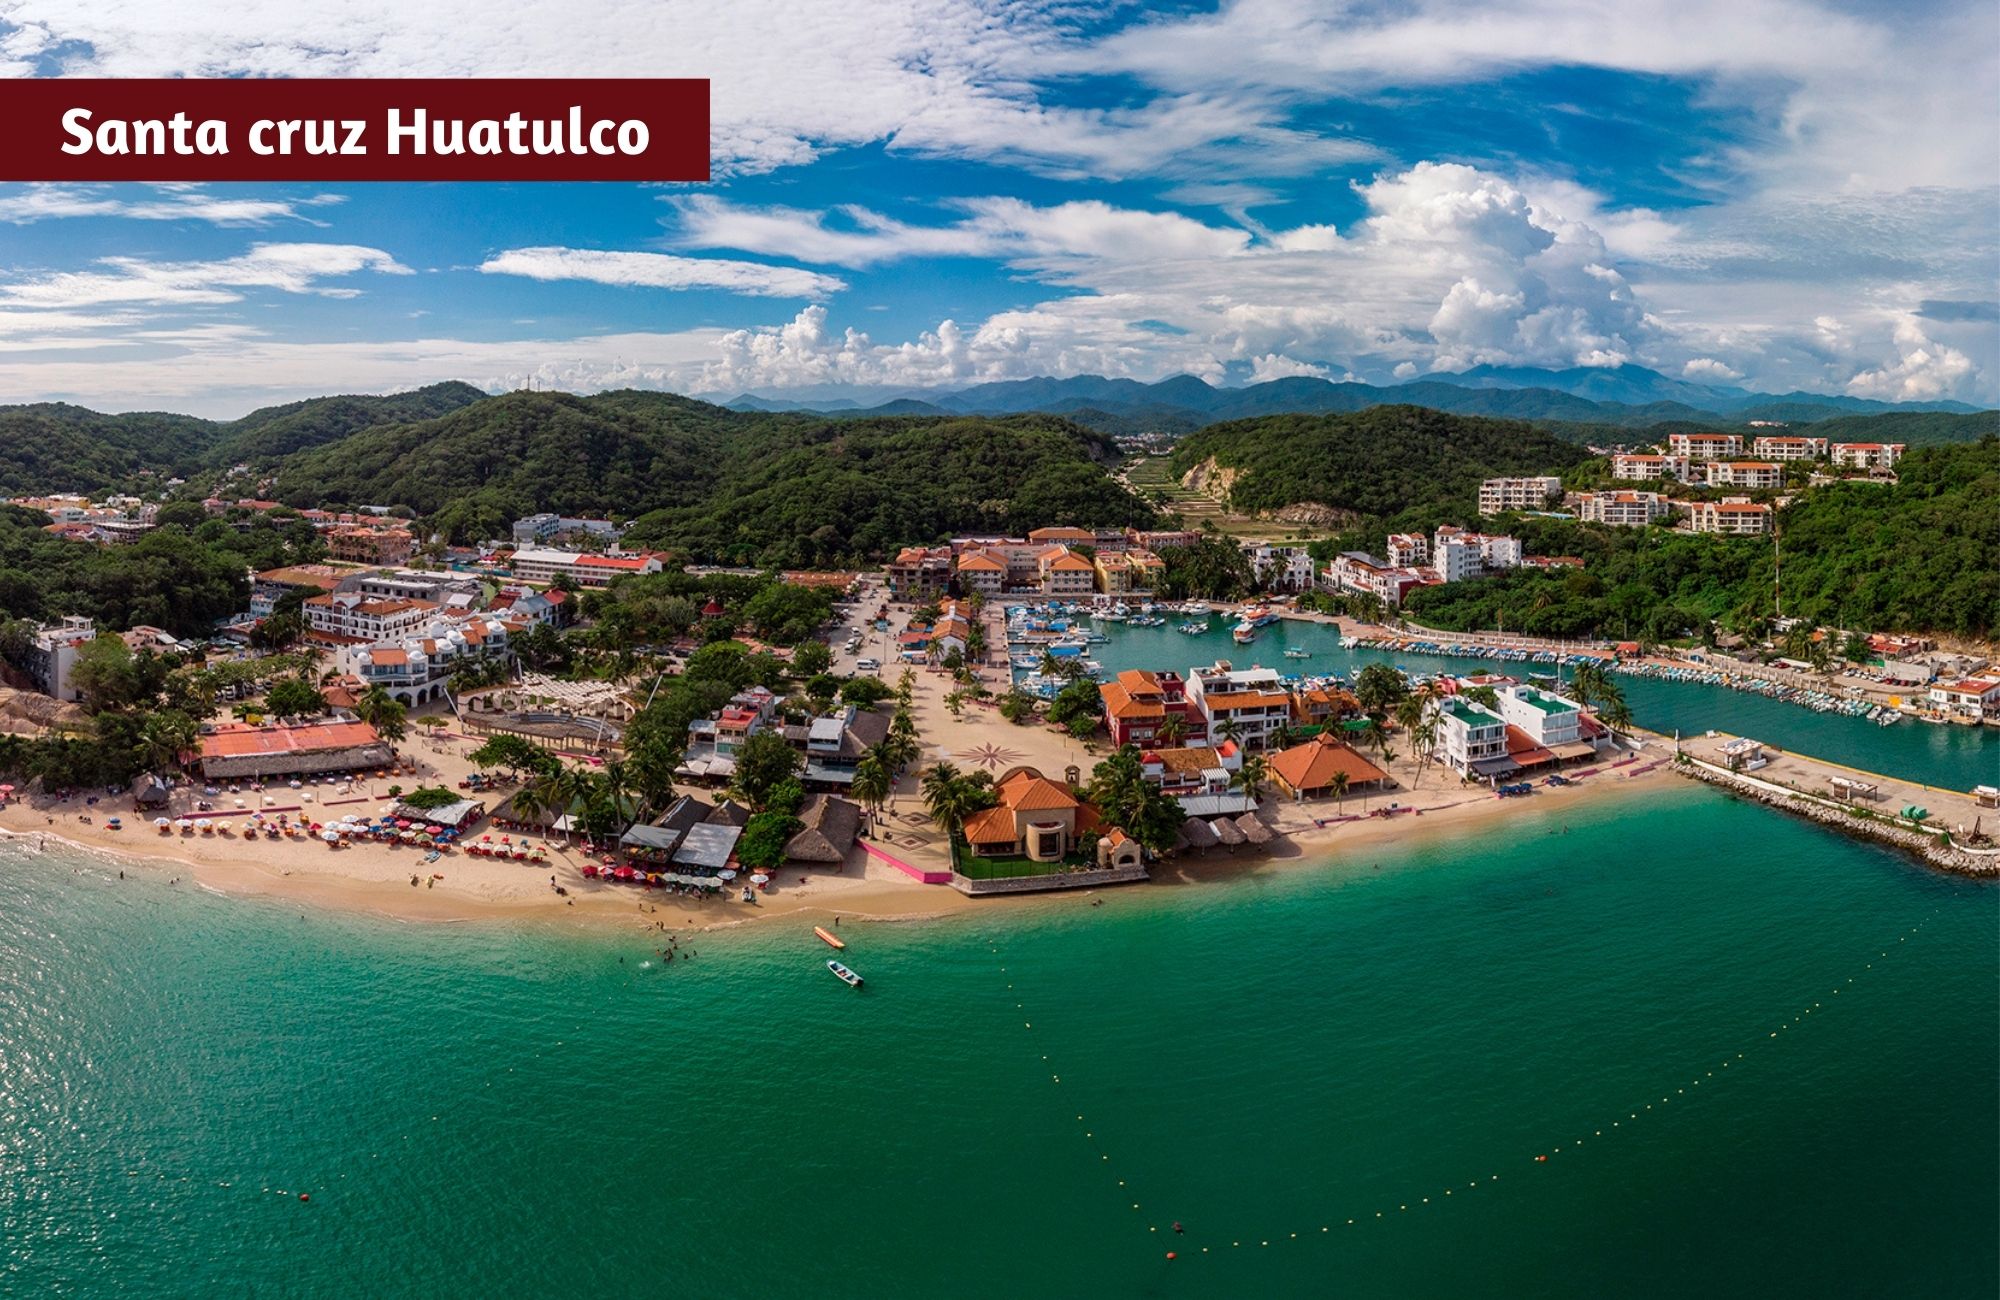 Apartment with ocean view and private pool for sale in Huatulco.